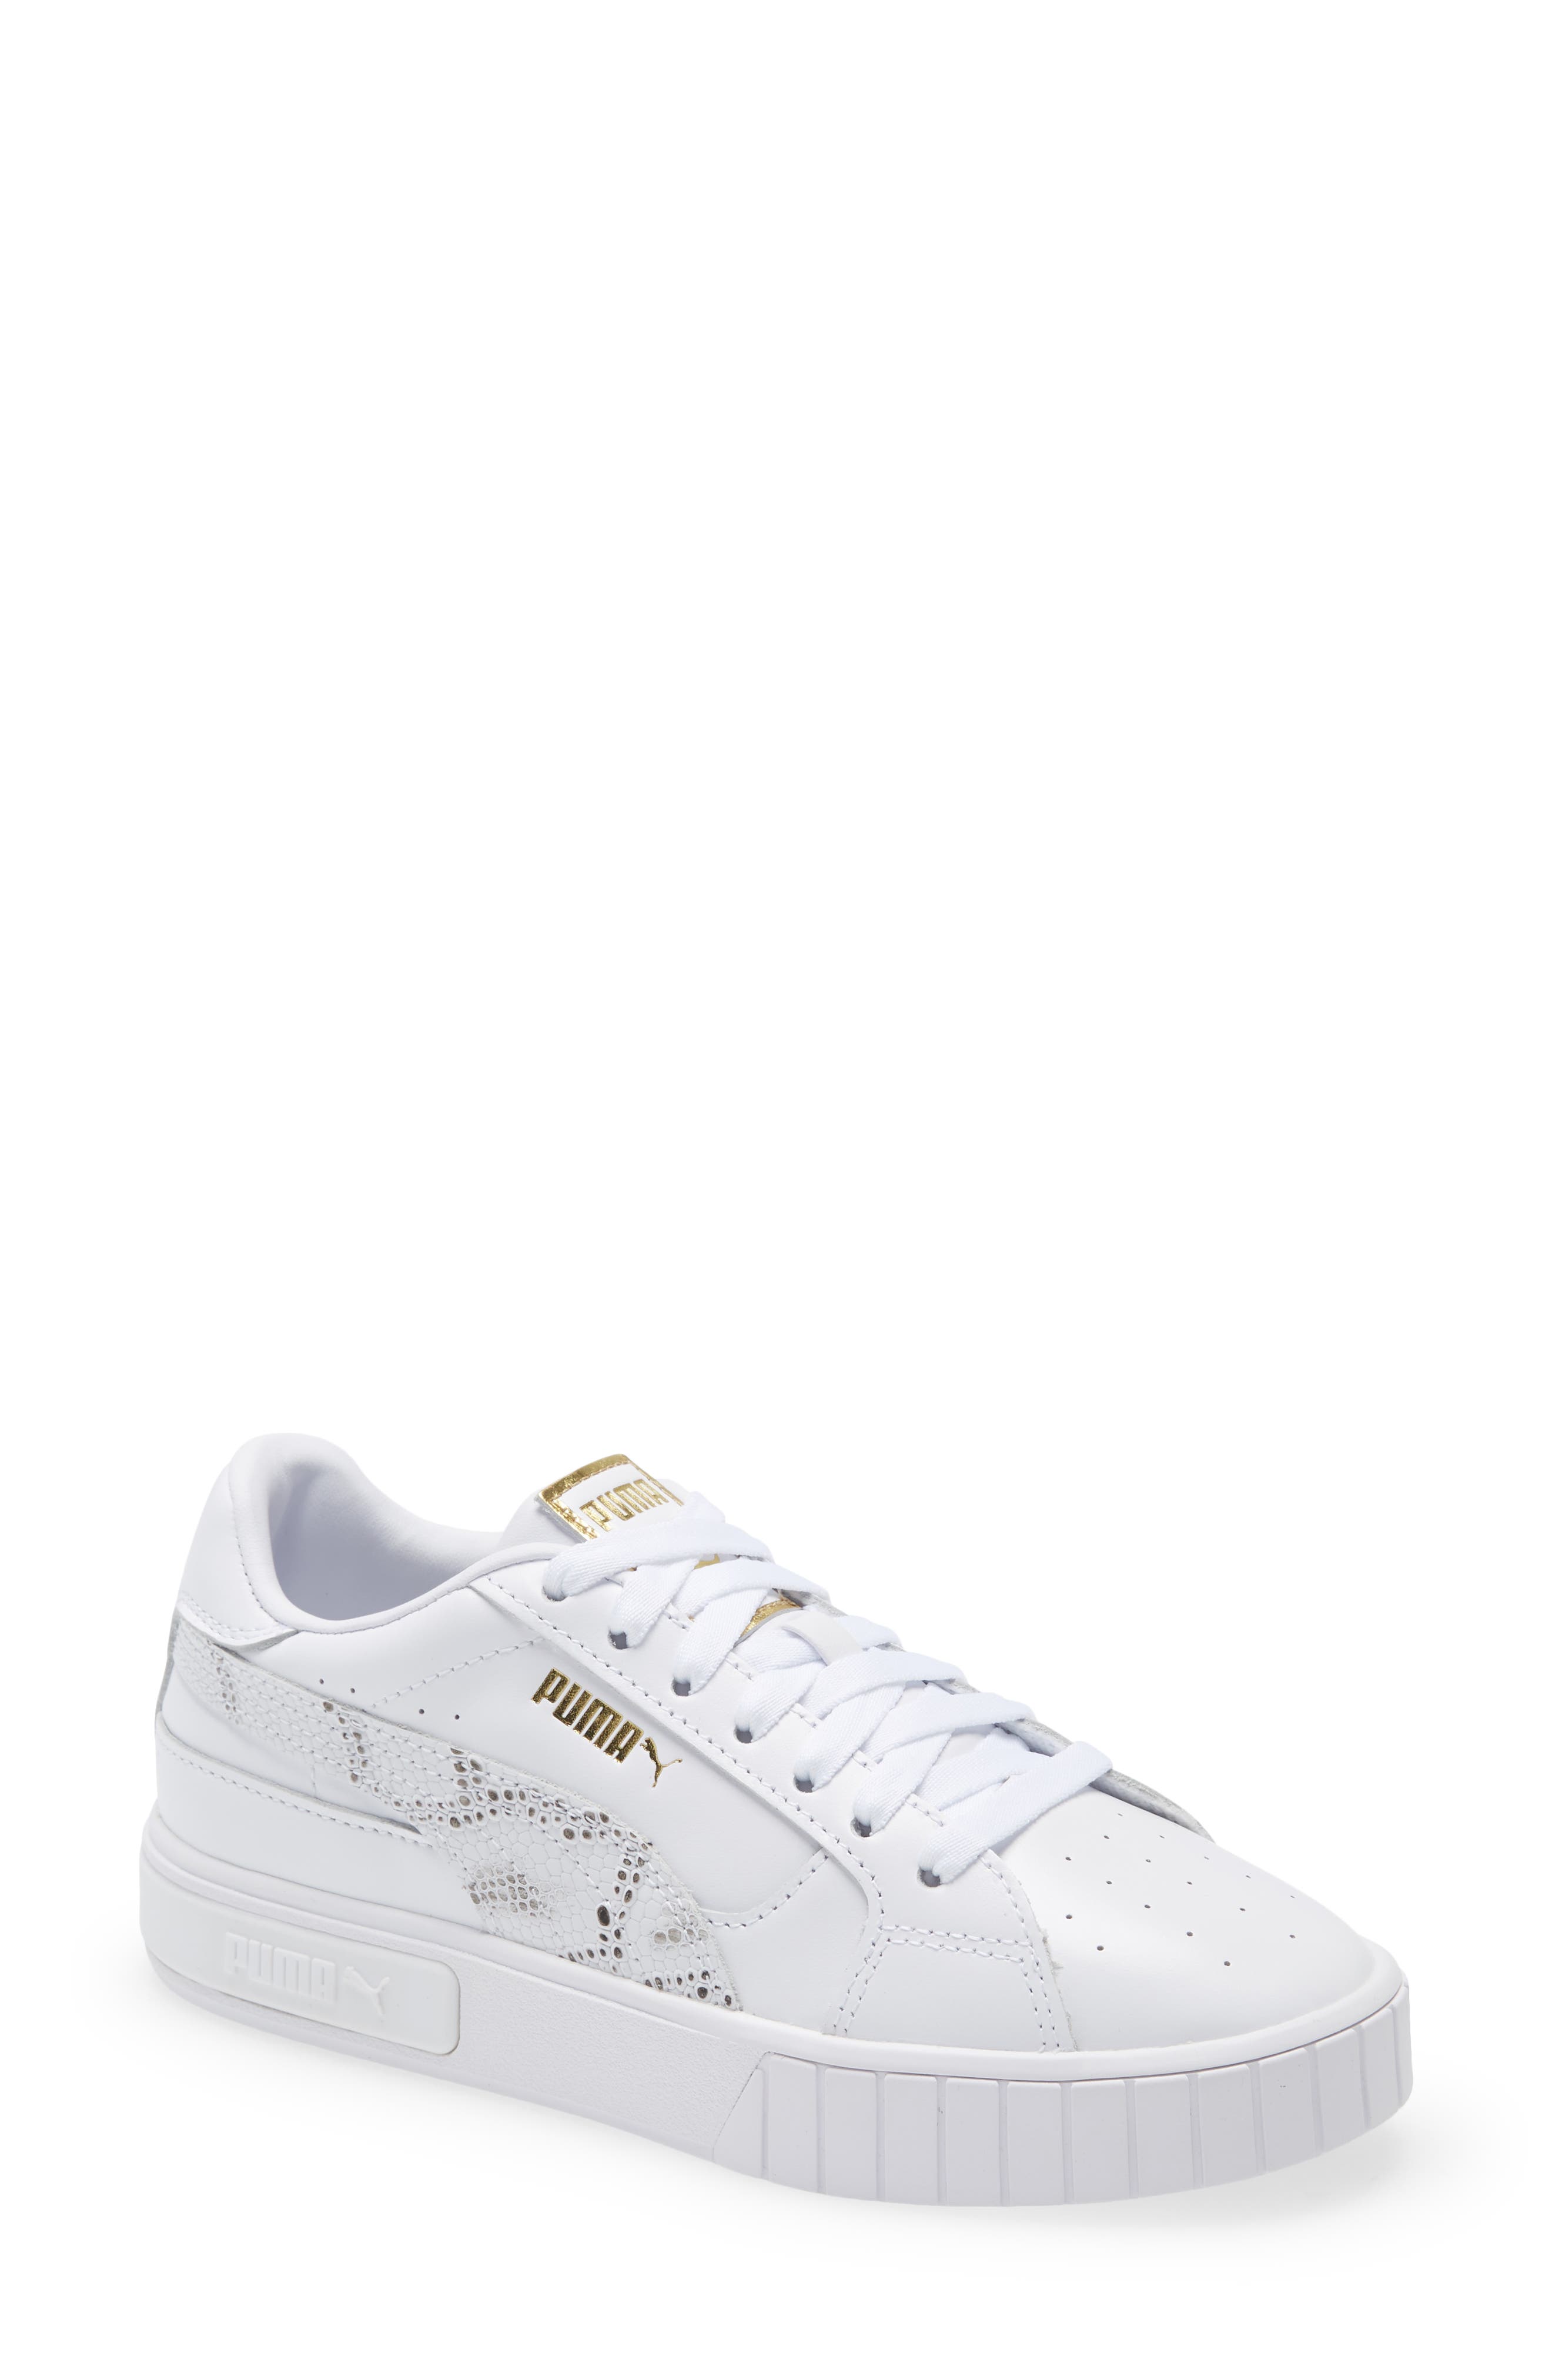 puma sneakers for womens